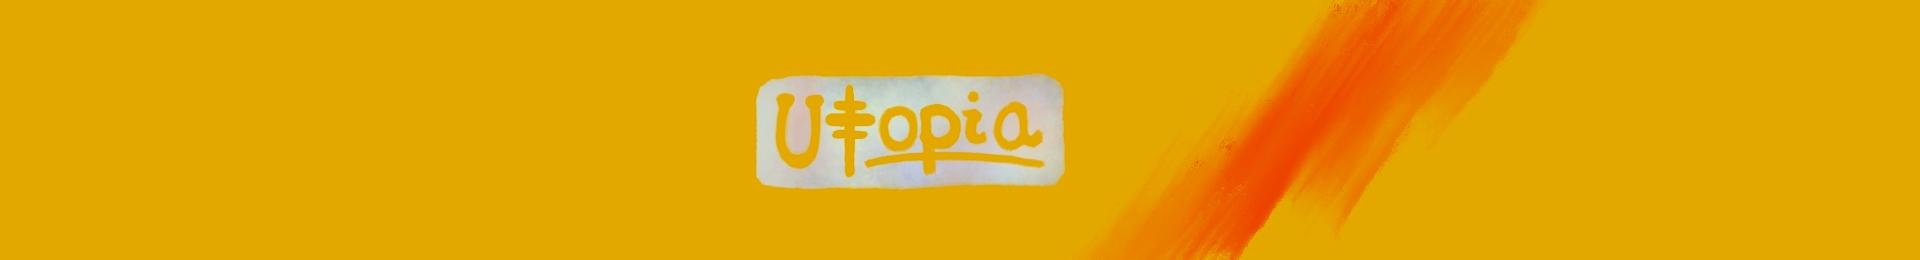 Utopia - Abstracts banner